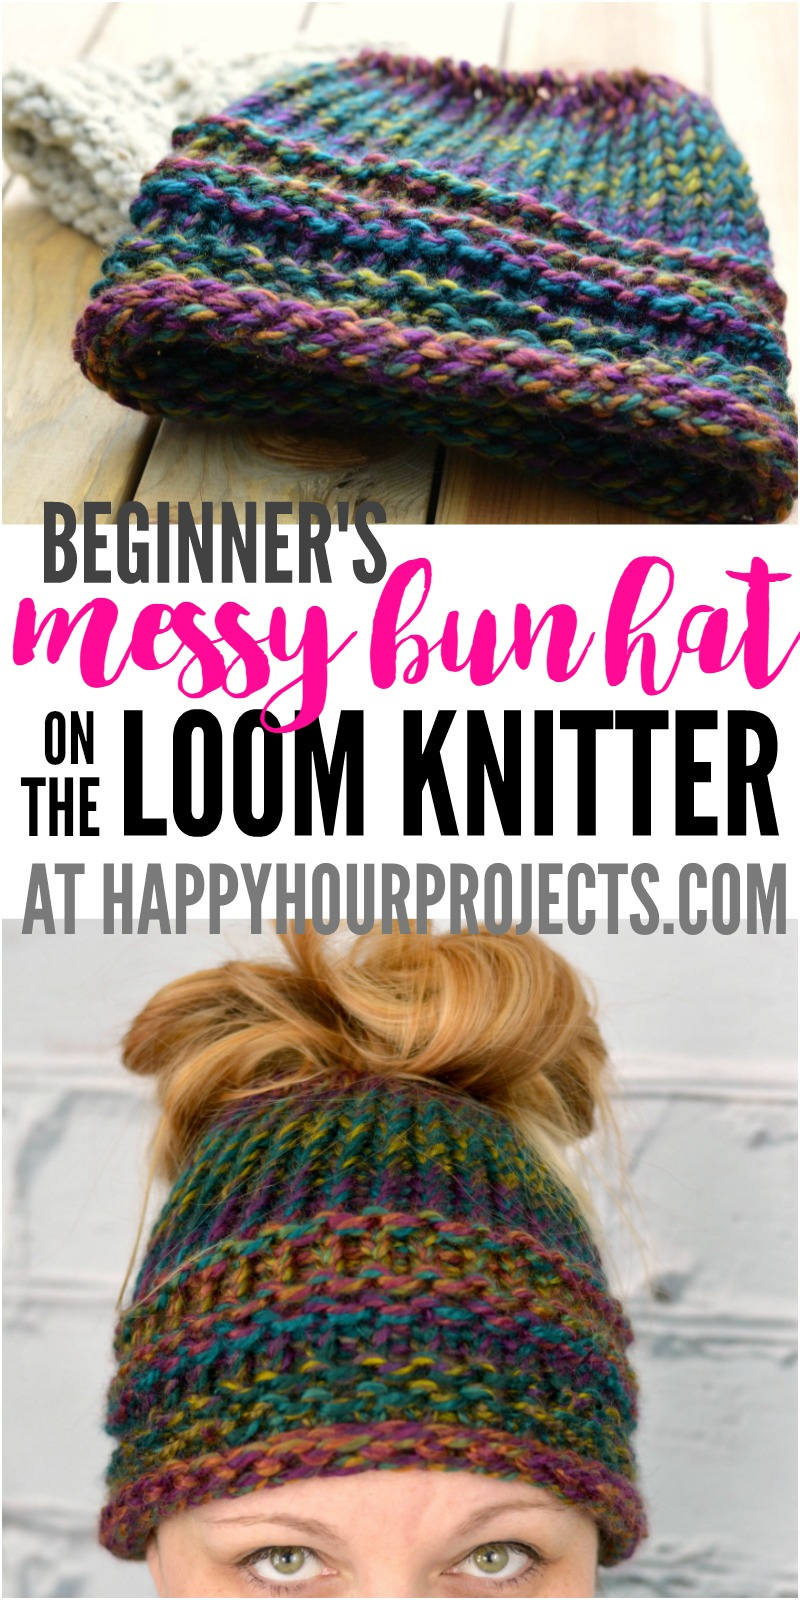 Loom Knit Patterns Round Looms Diy Messy Bun Hat Loom Knitter Pattern For Beginners Happy Hour